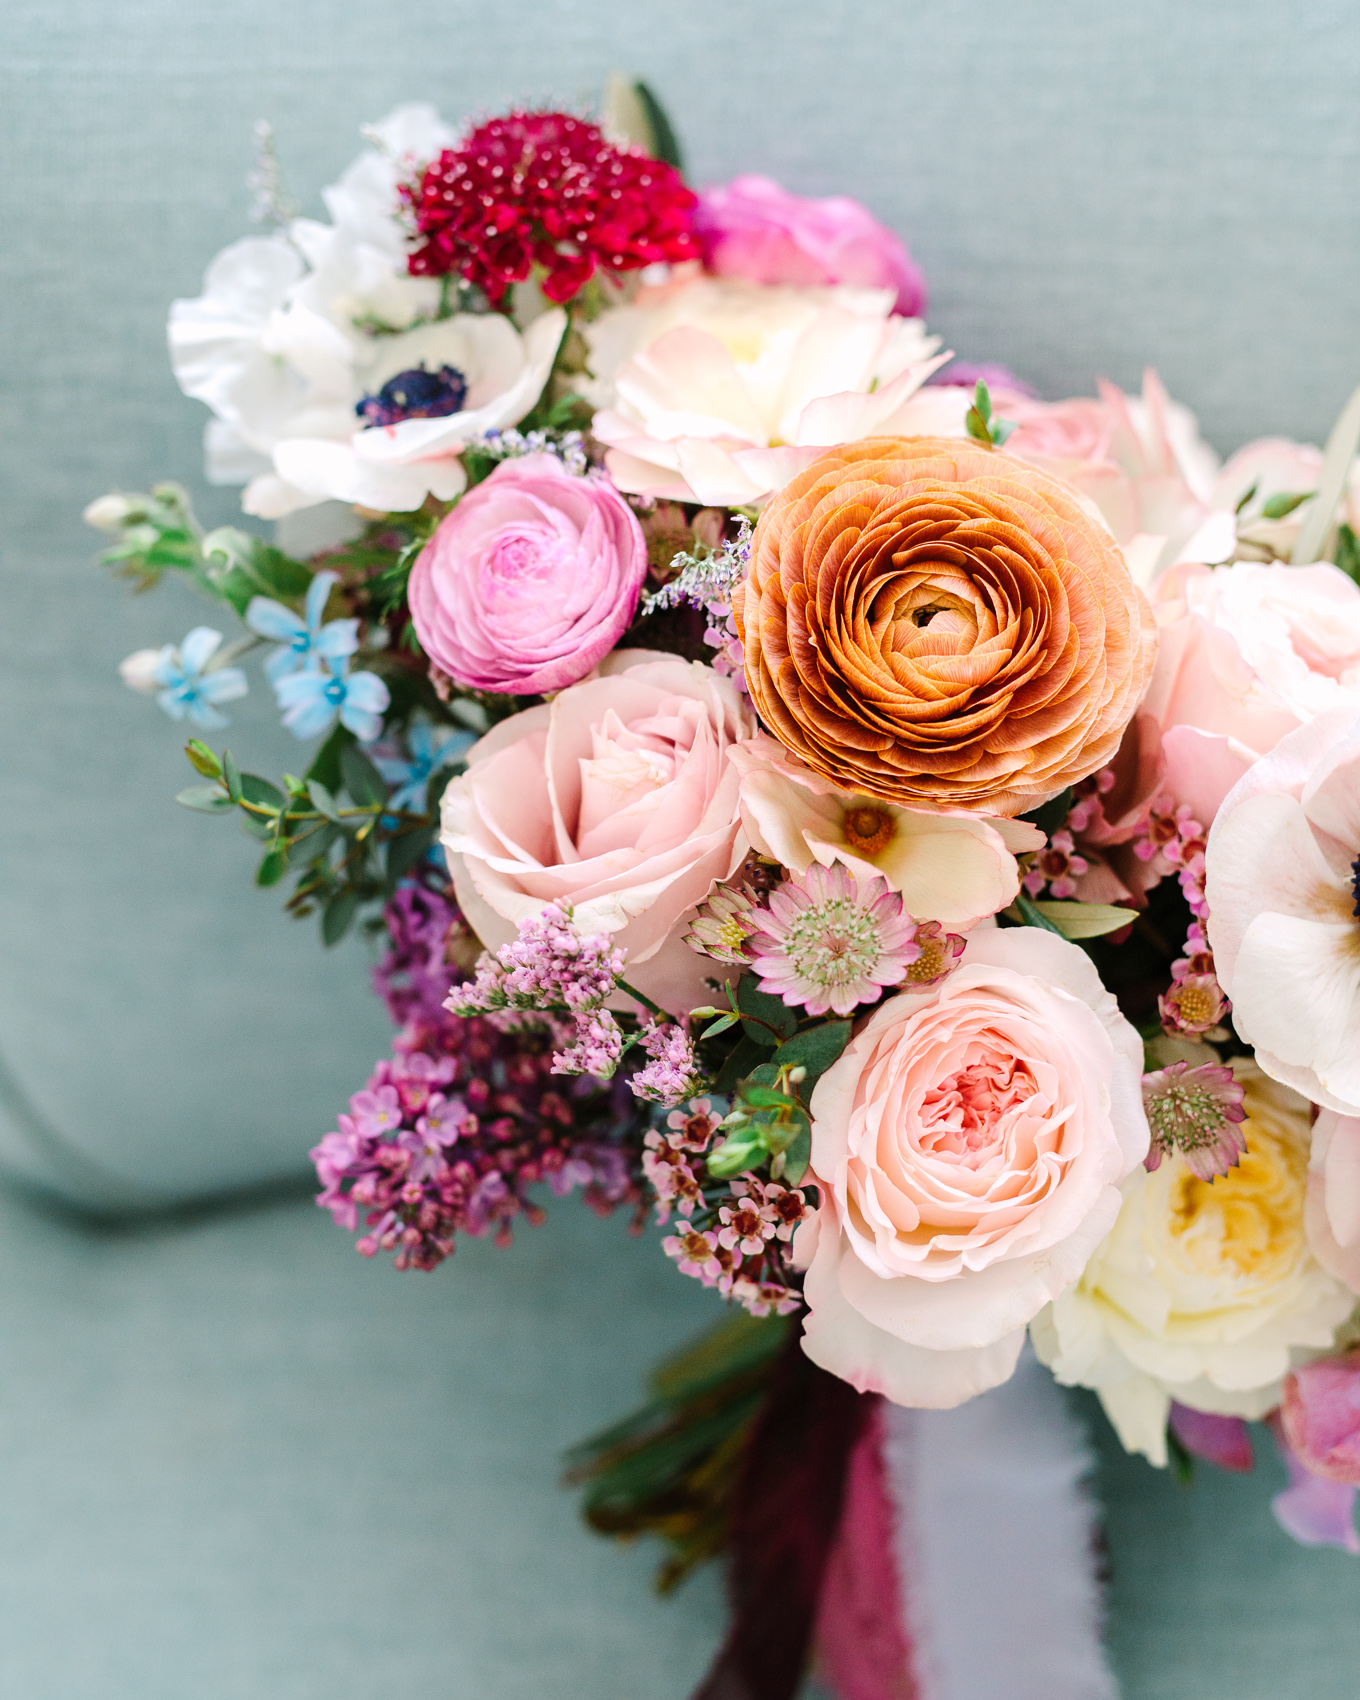 Spring bouquet with ranunculus and garden roses | Beautiful bridal bouquet inspiration and advice | Colorful and elevated wedding photography for fun-loving couples in Southern California | #weddingflowers #weddingbouquet #bridebouquet #bouquetideas #uniquebouquet   Source: Mary Costa Photography | Los Angeles